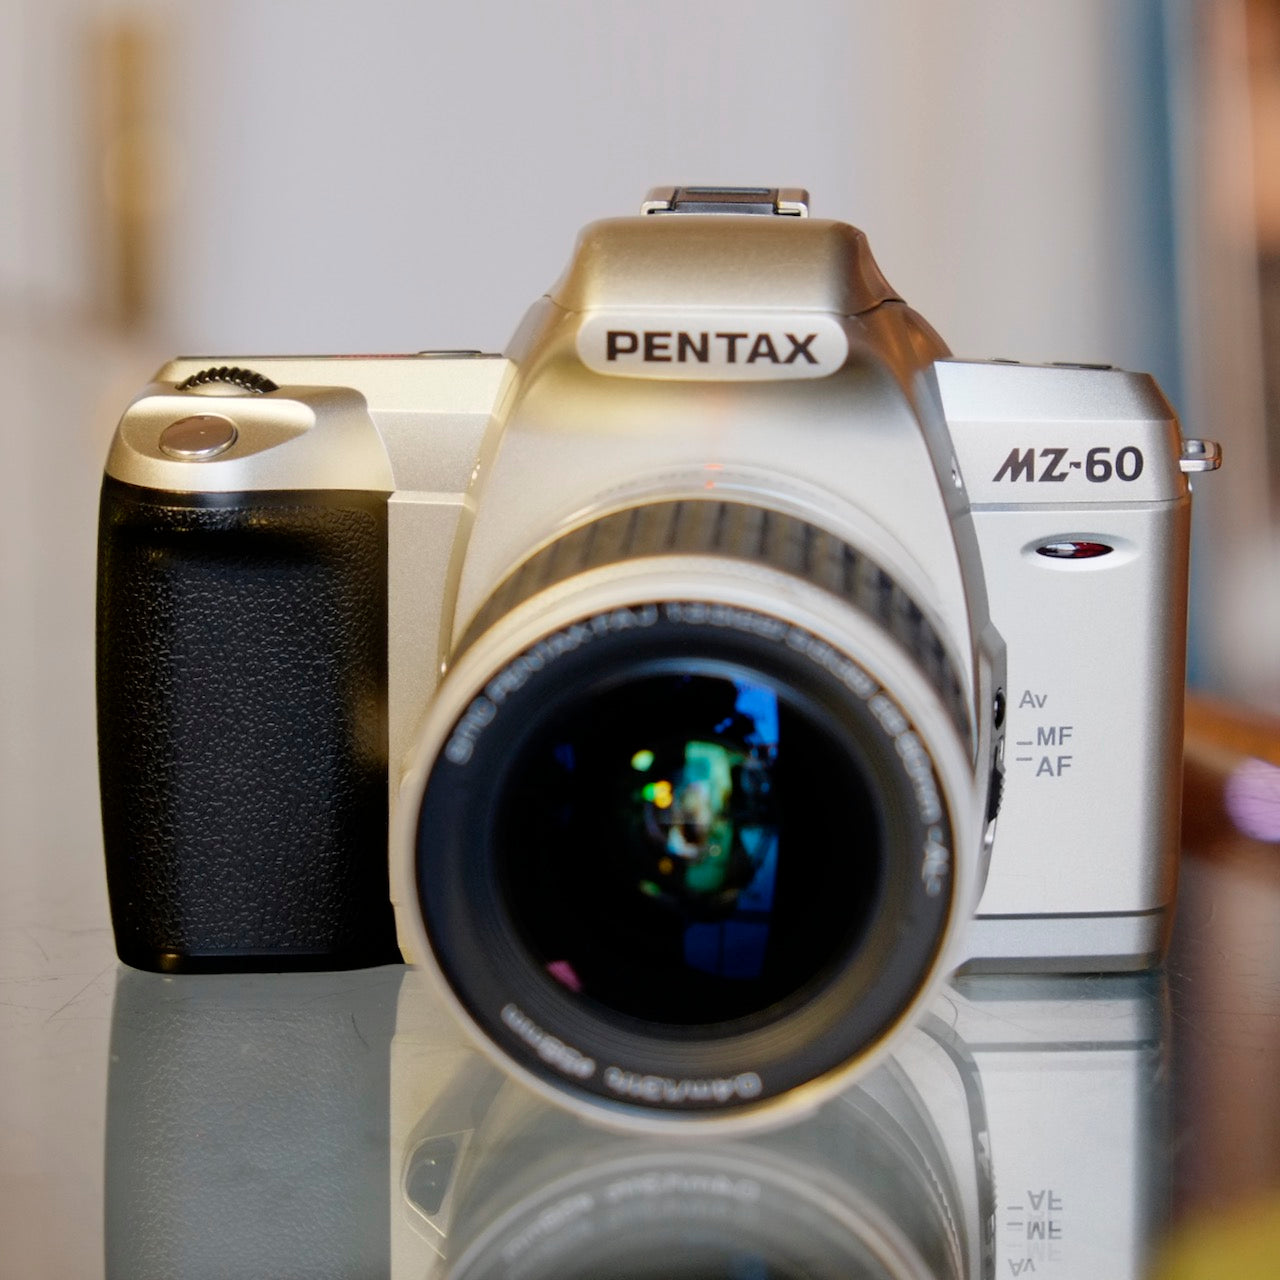 Pentax MZ-60 with 28-80mm f3.5-5.6